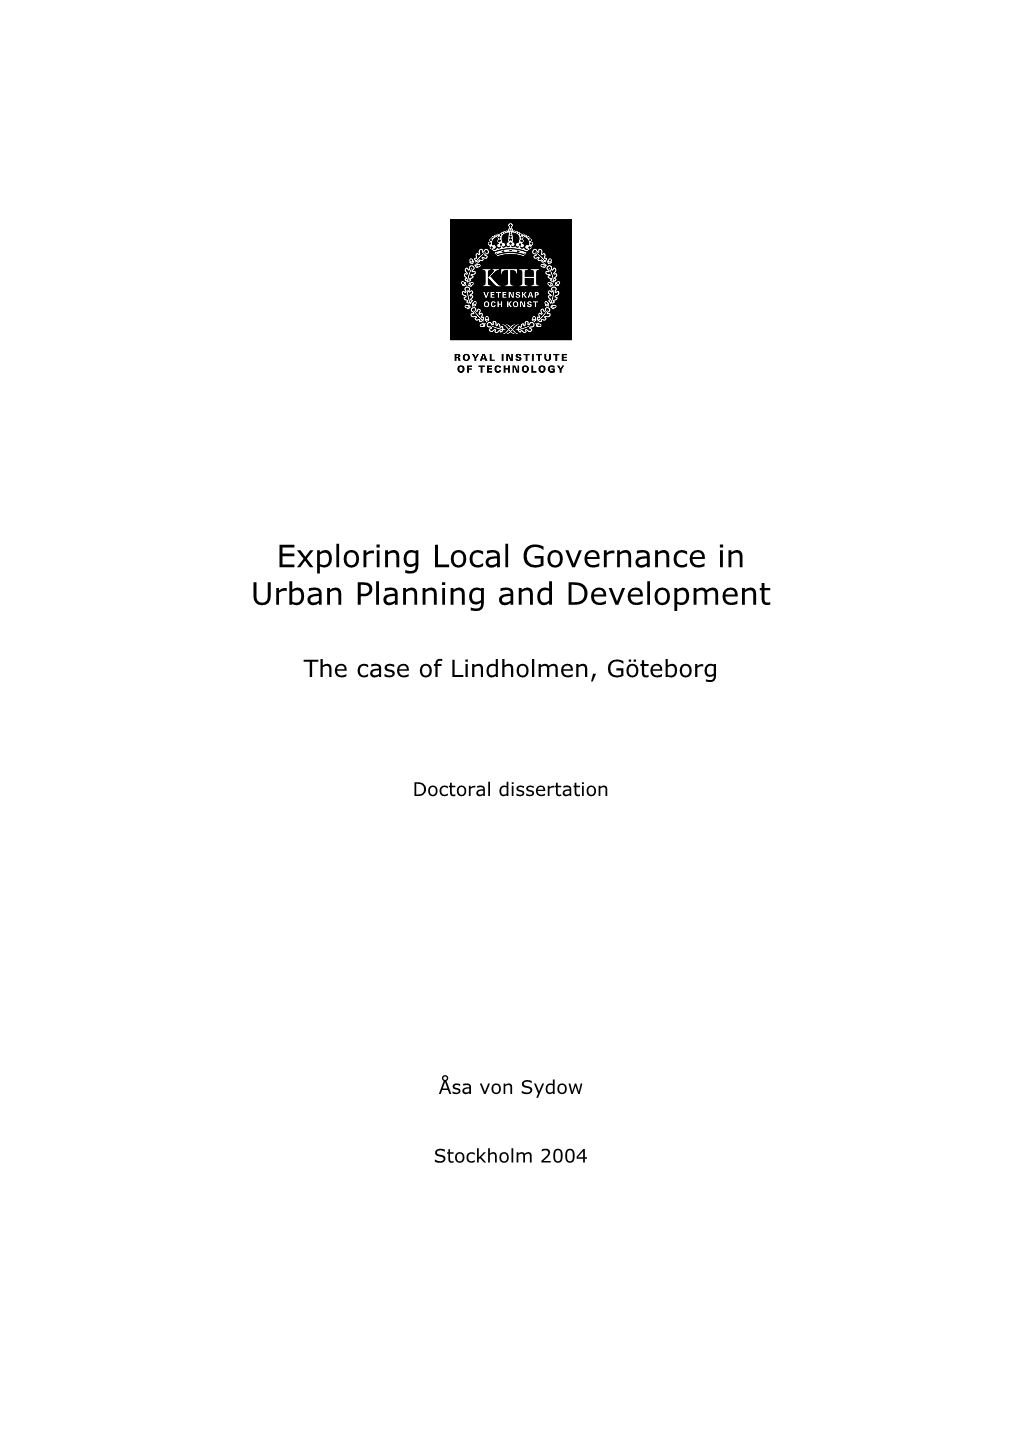 Exploring Local Governance in Urban Planning and Development